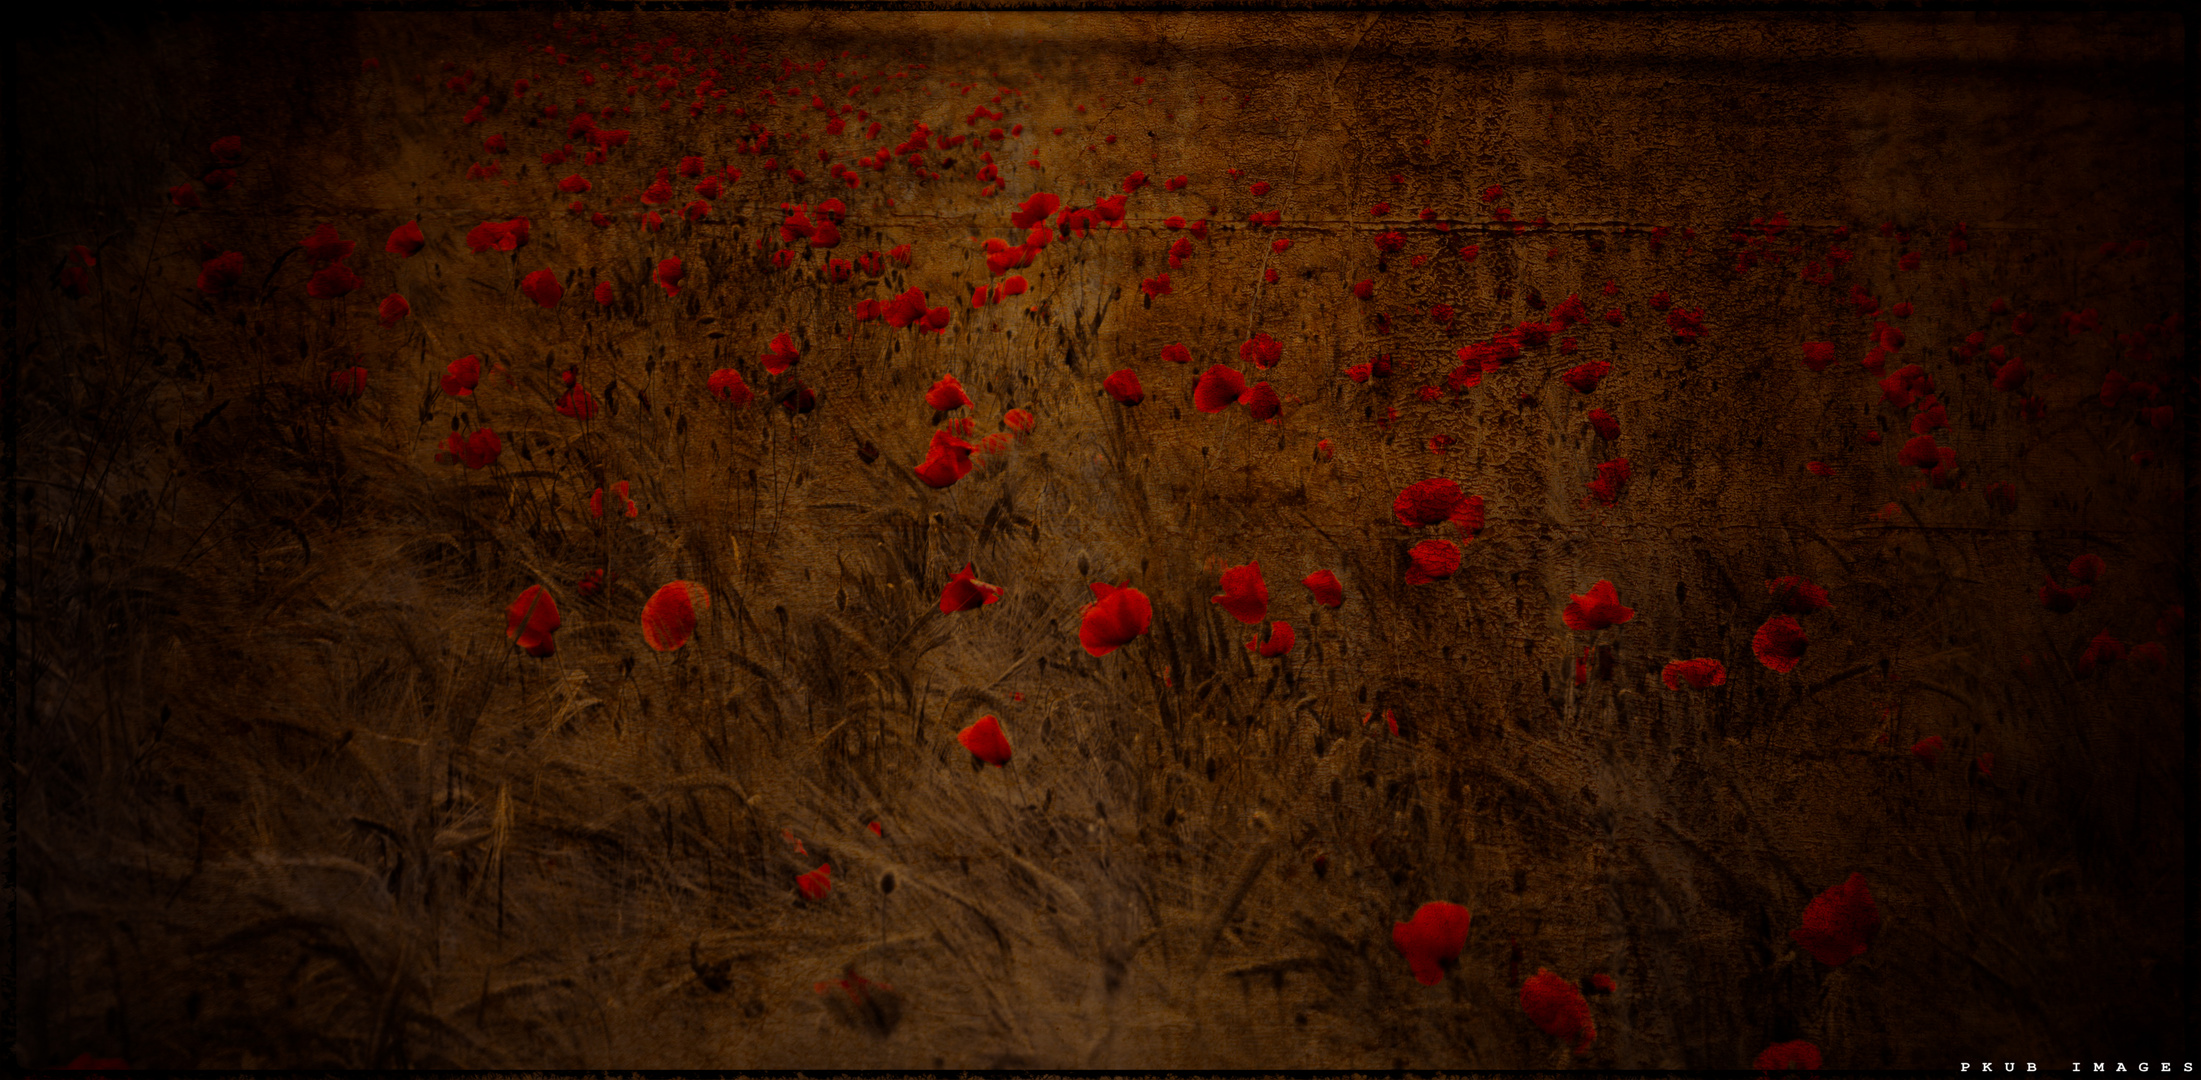 A sea of Poppies